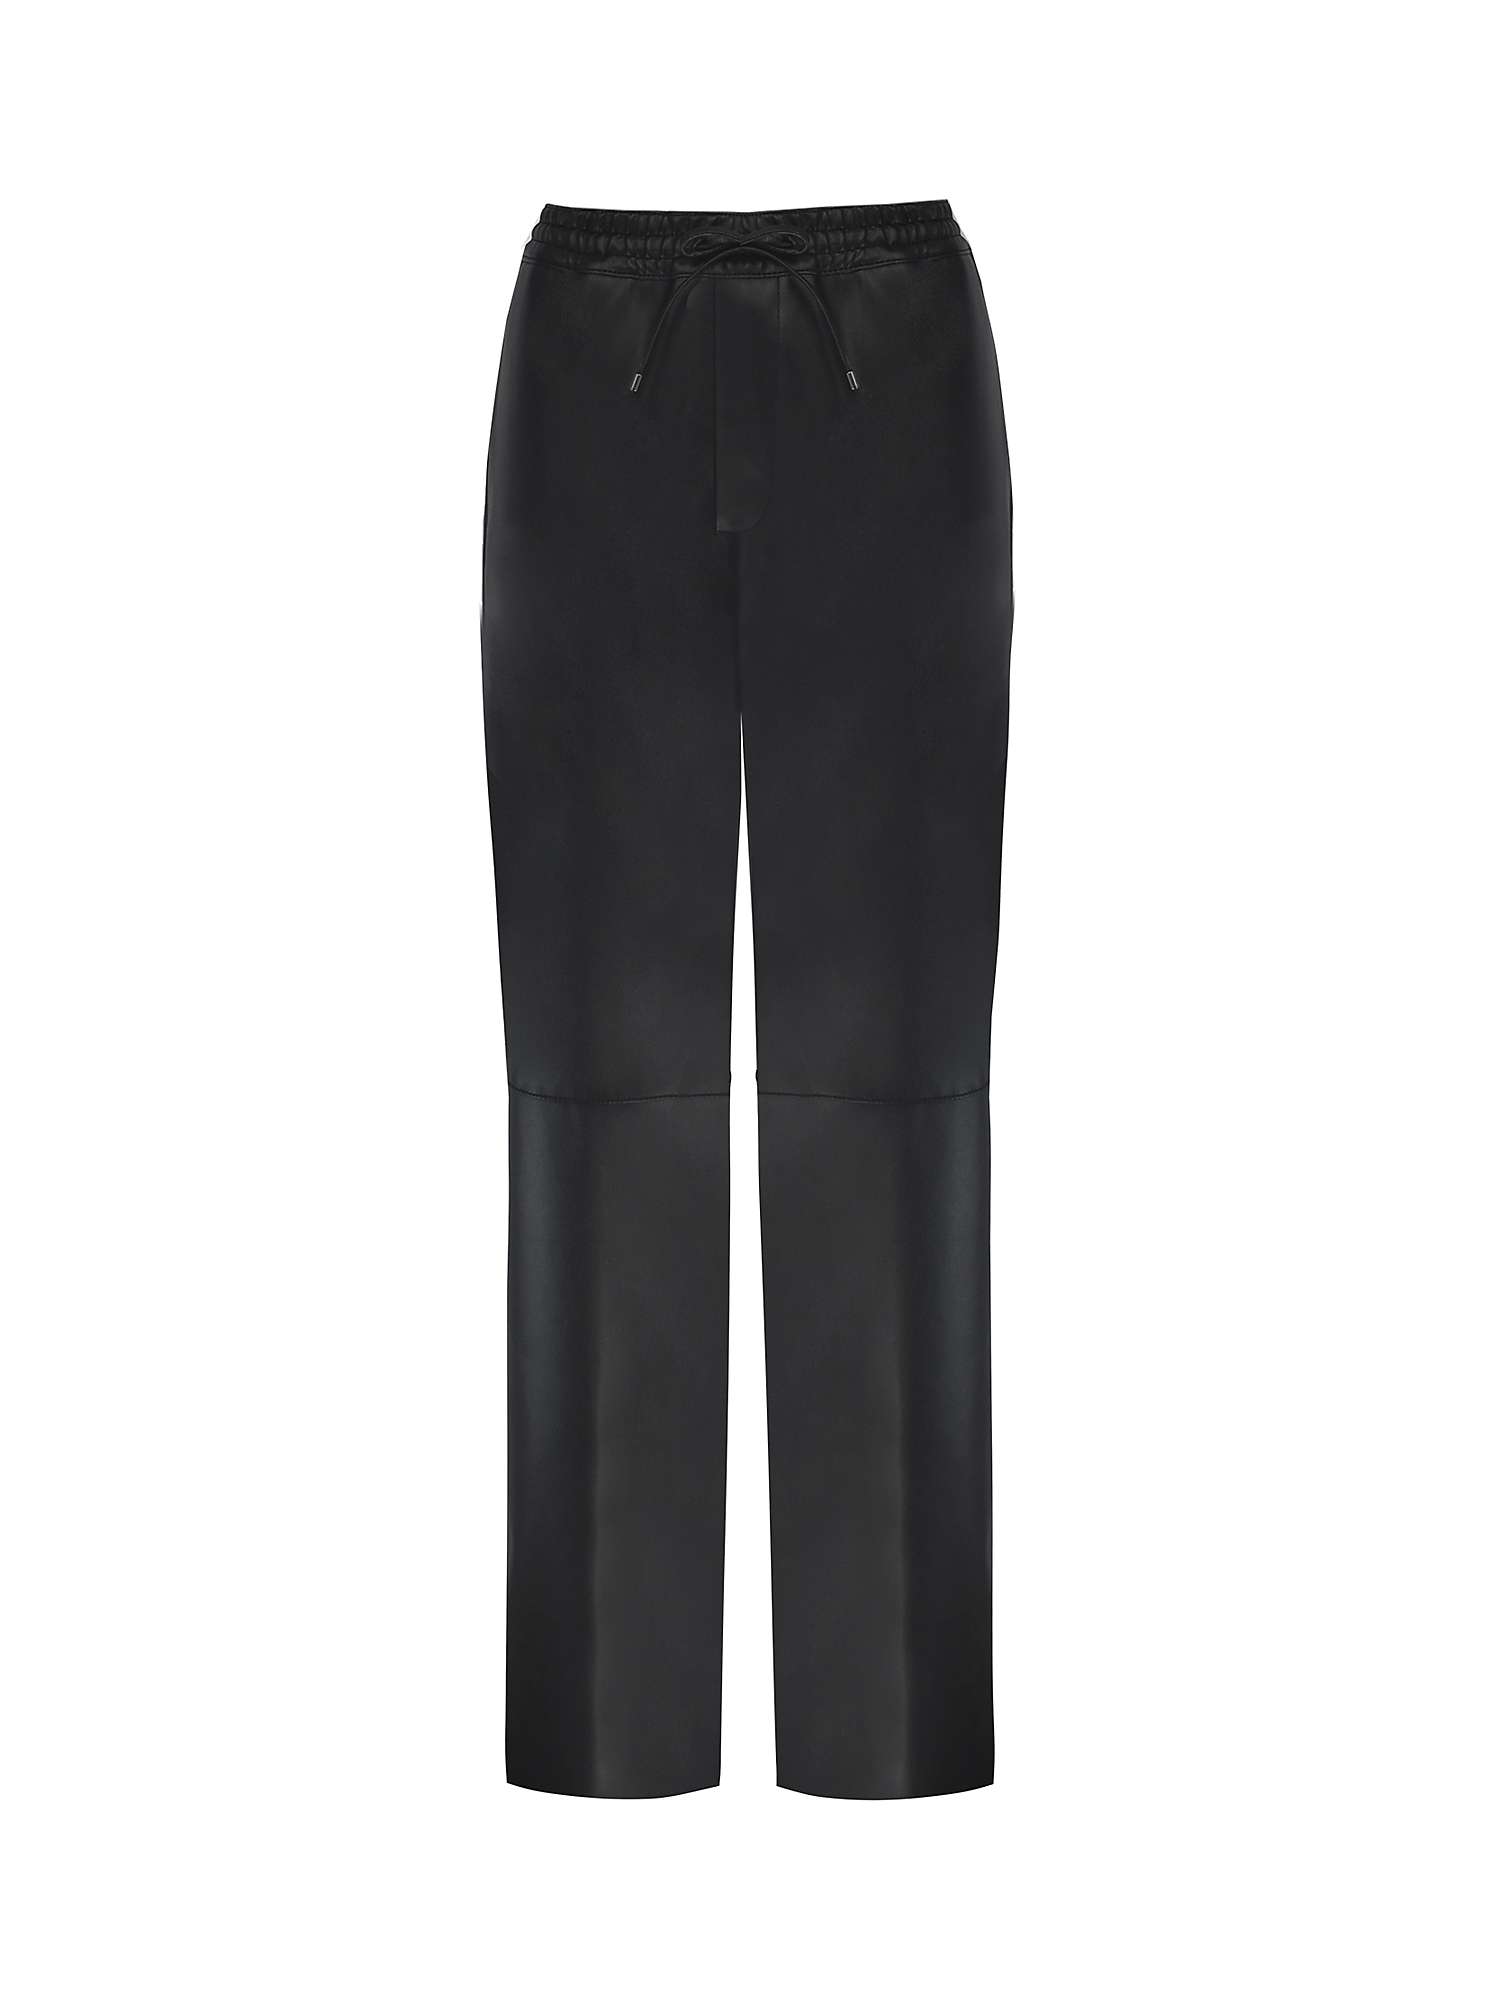 Buy Ro&Zo Faux Leather Joggers, Black Online at johnlewis.com